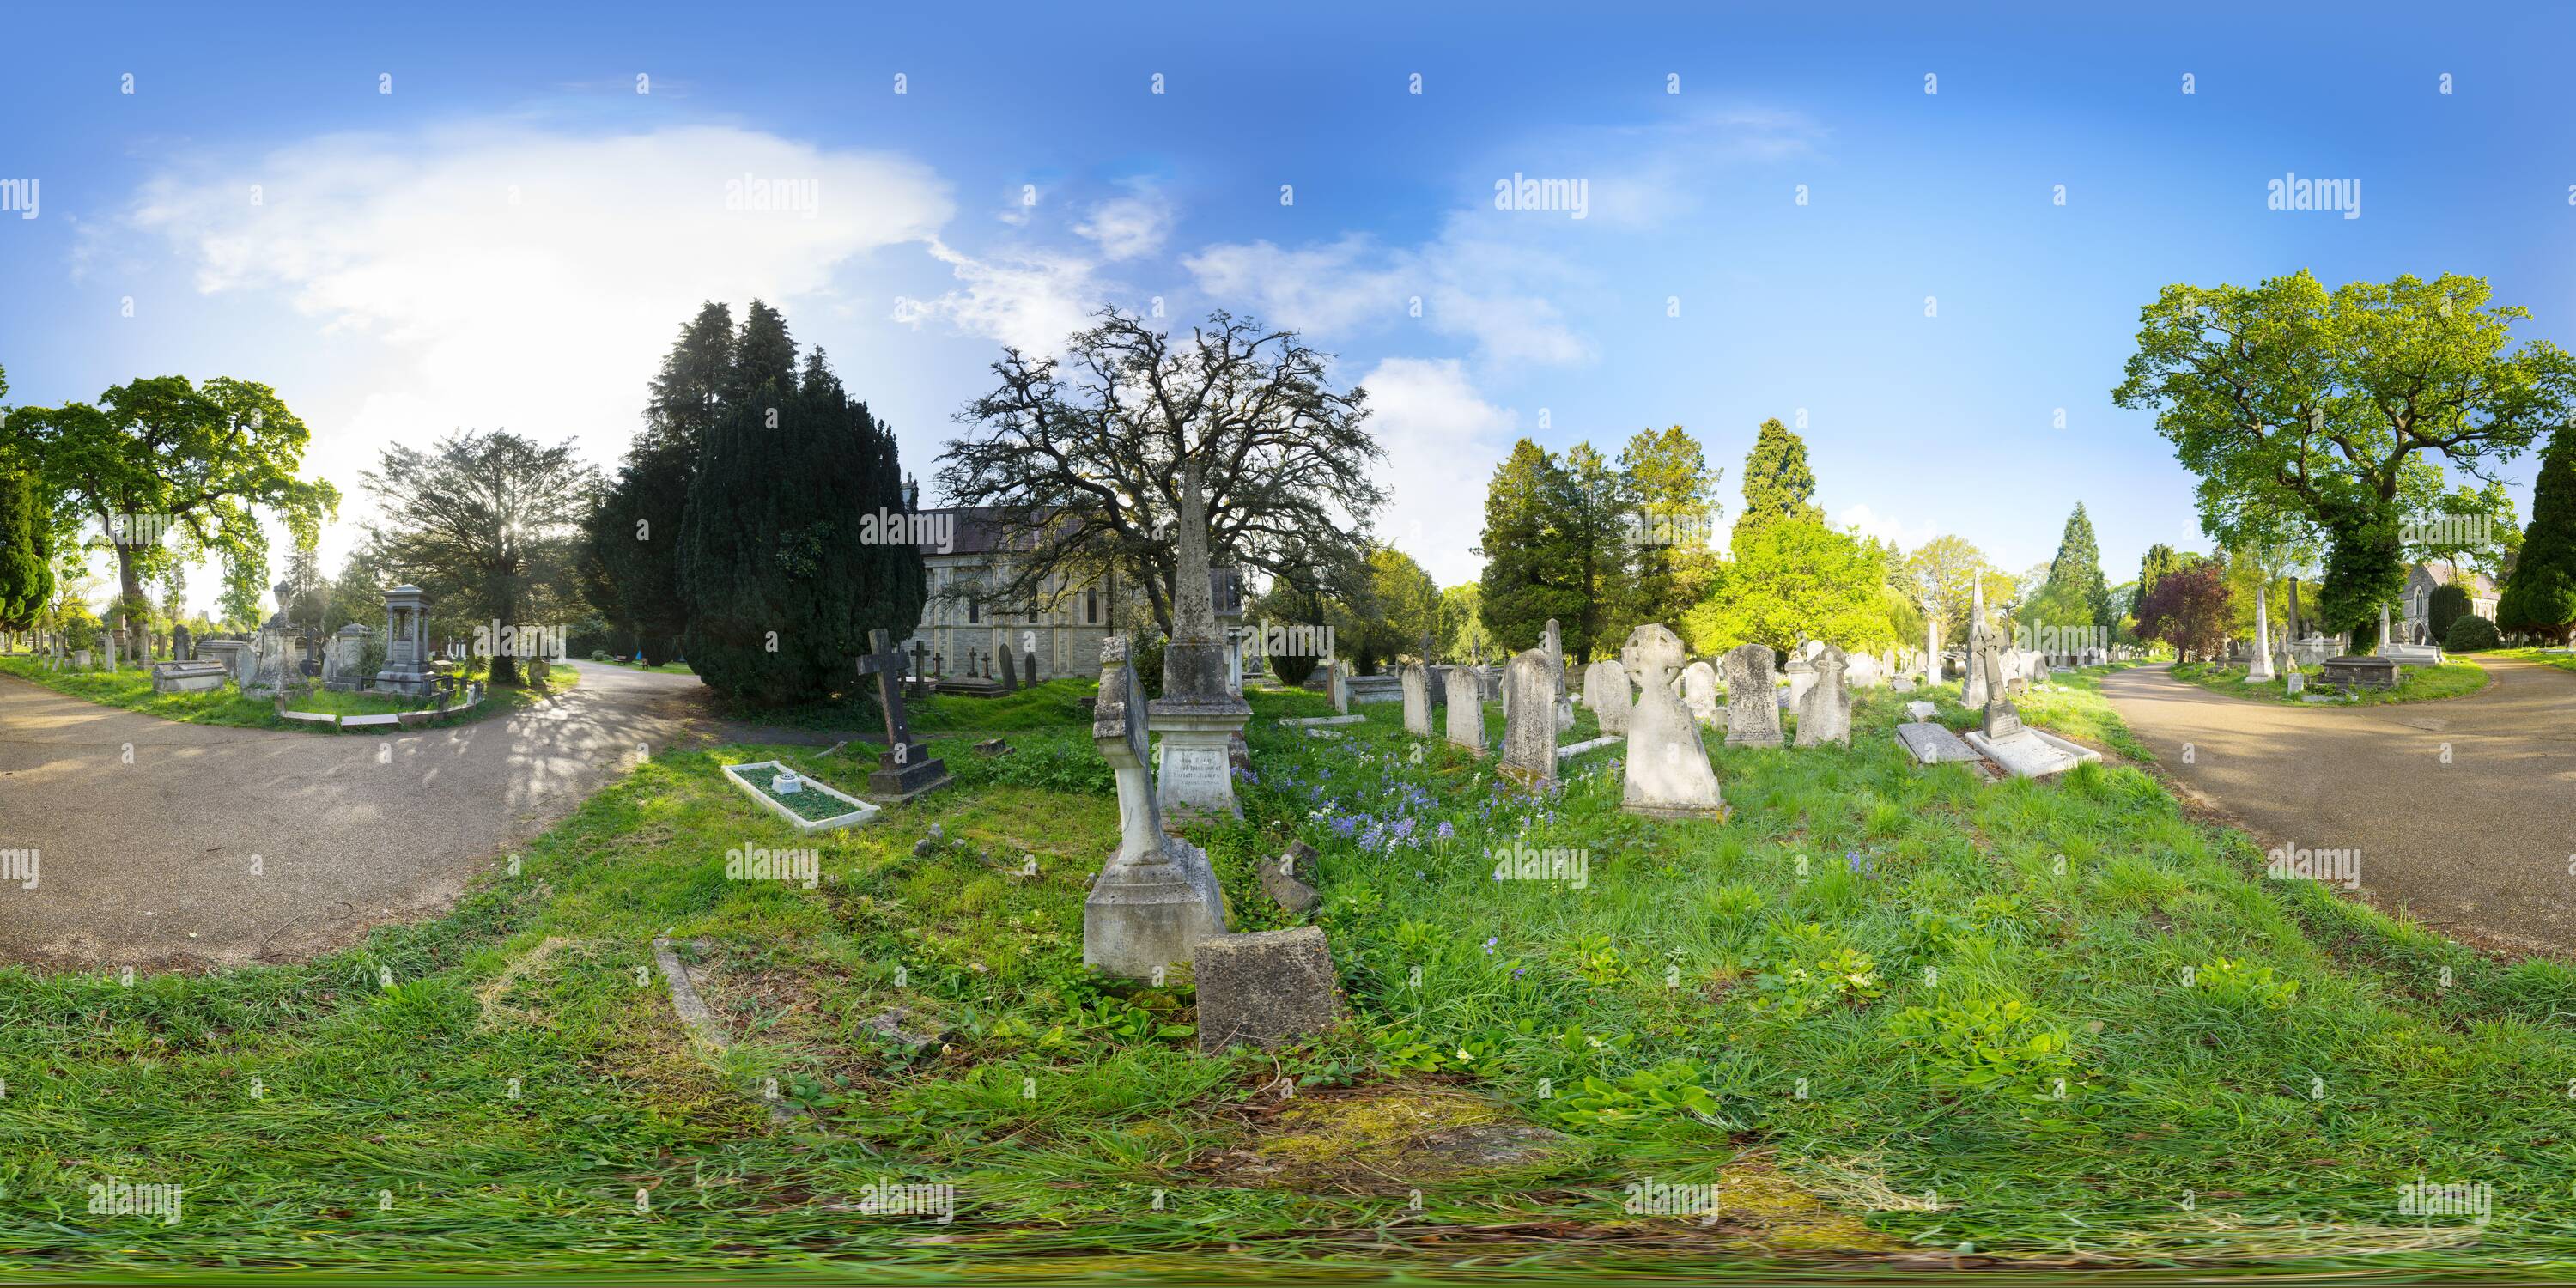 360 degree panoramic view of The Anglican and Nonconformist mortuary chapels in Southampton Old Cemetery on Southanpton Common, Hampshire, England.